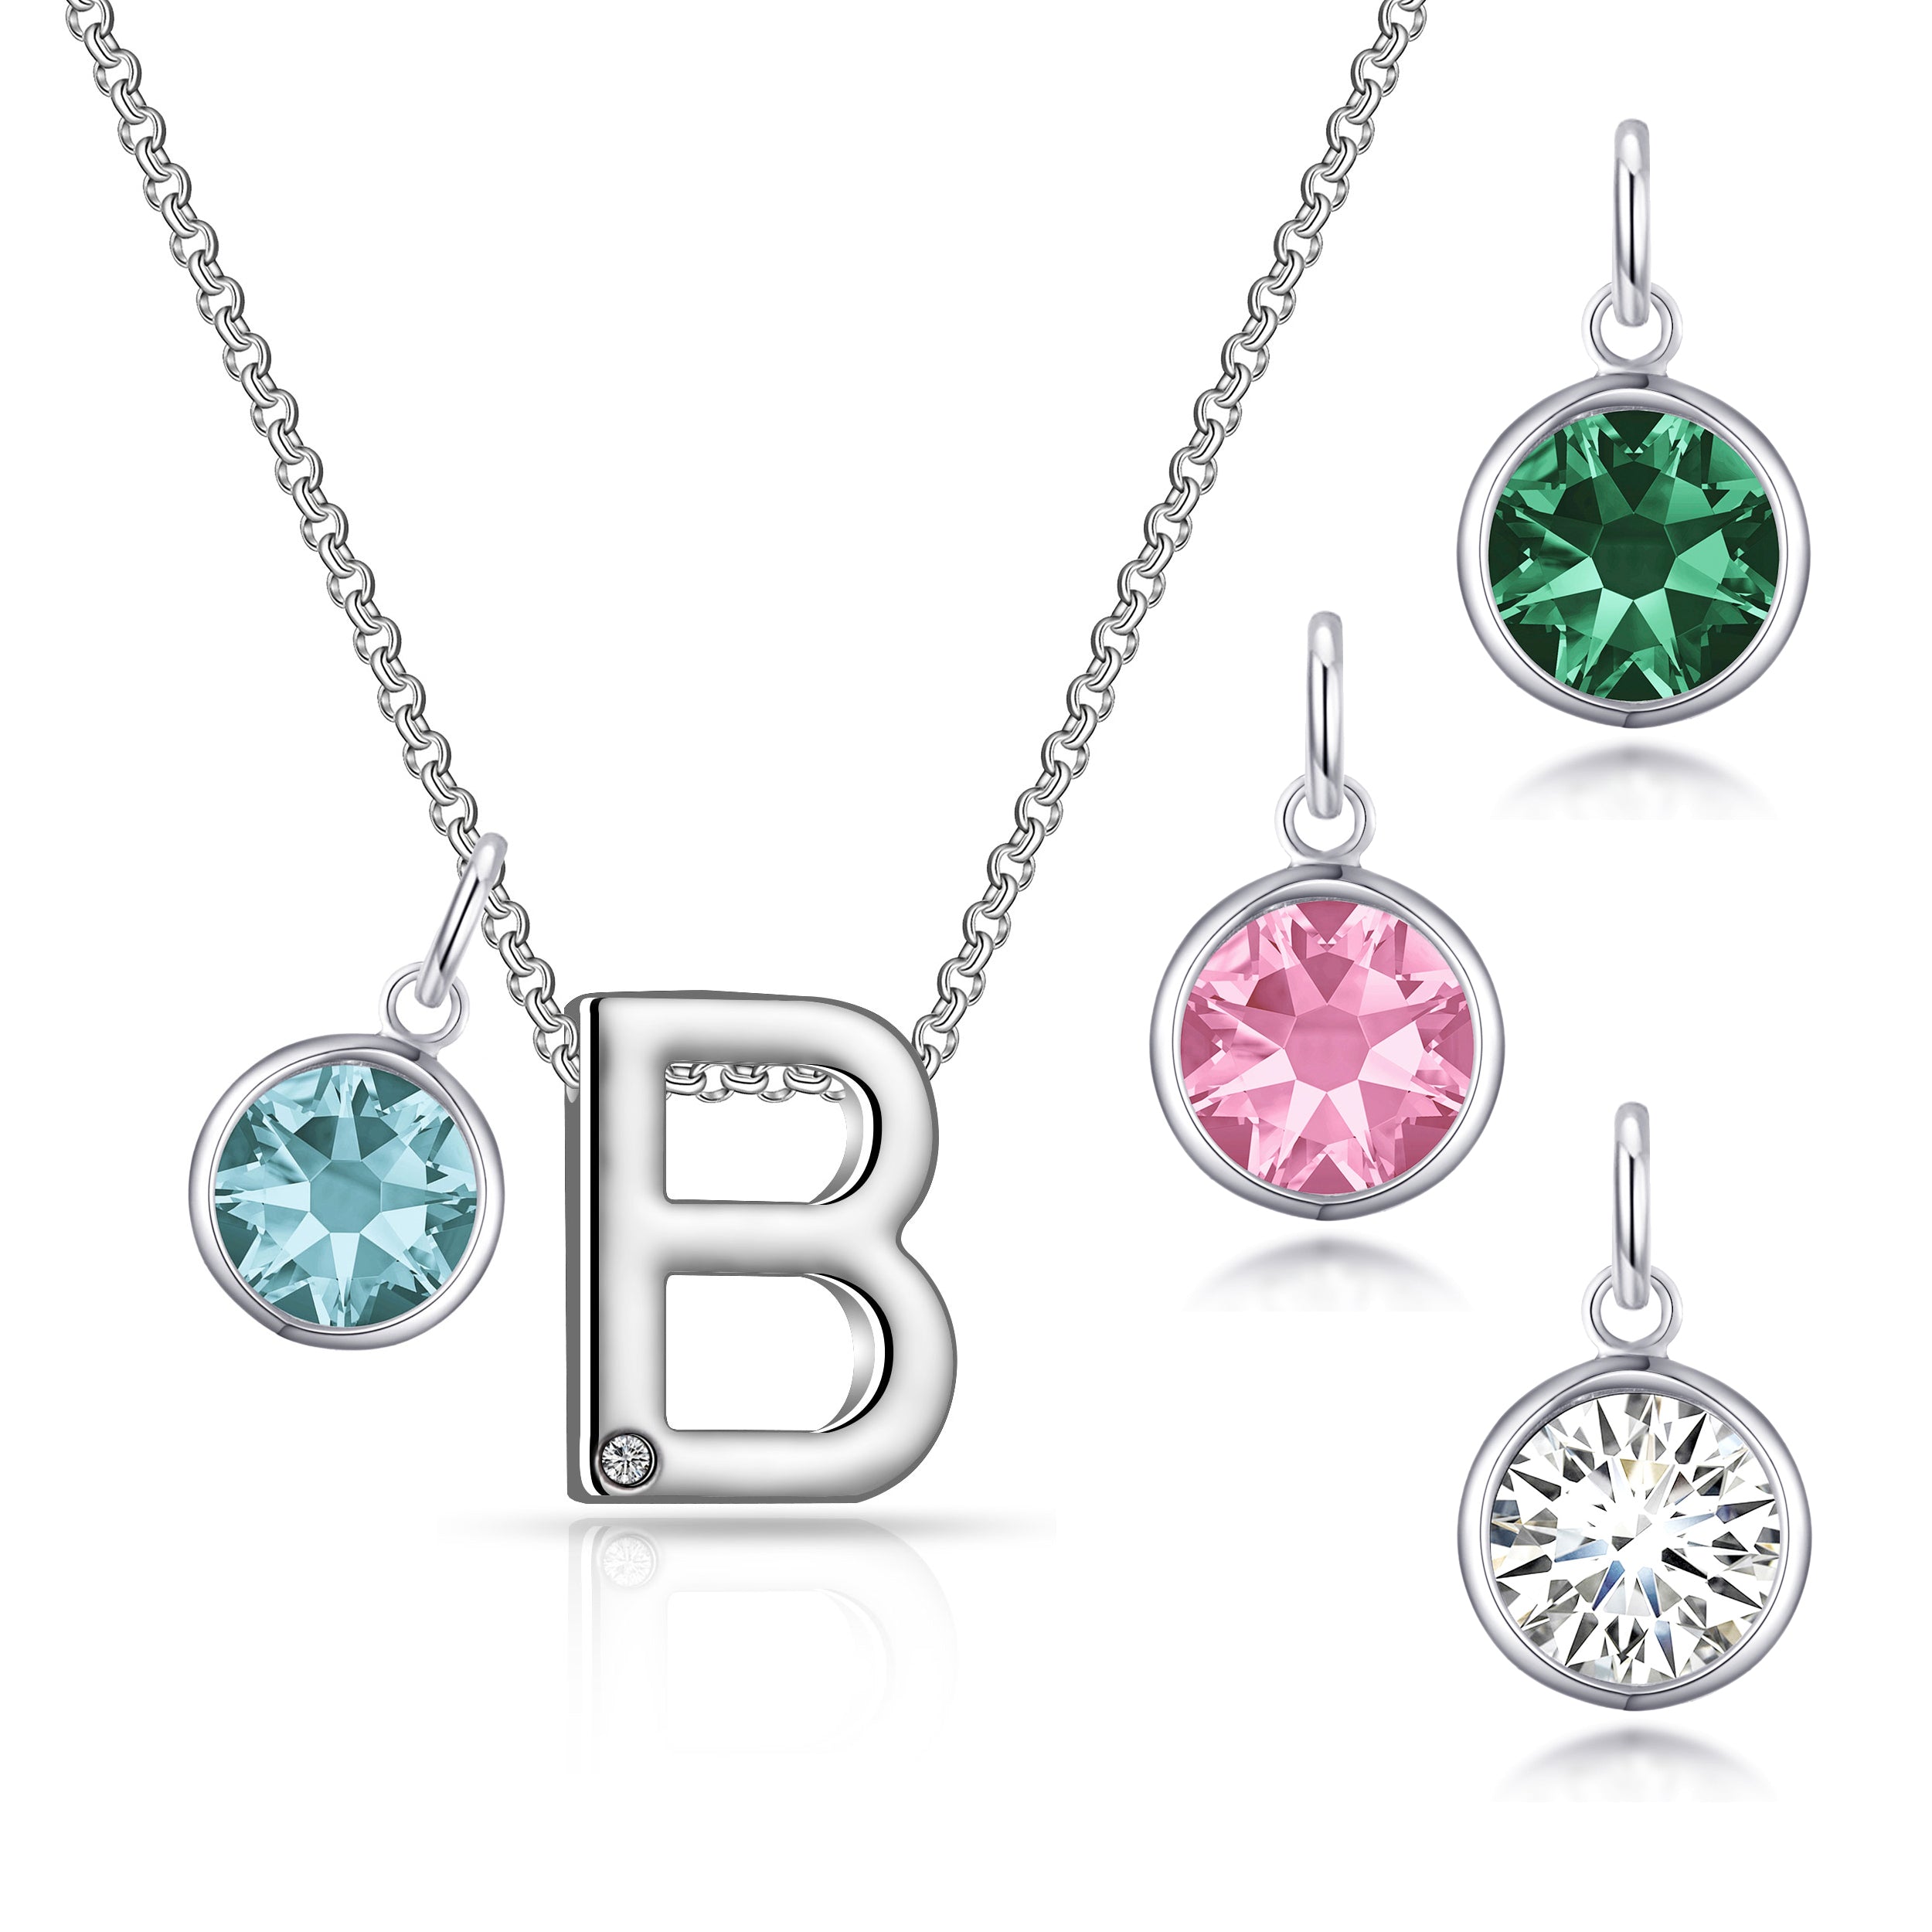 Birthstone Initial Necklace Letter B Created with Zircondia® Crystals by Philip Jones Jewellery